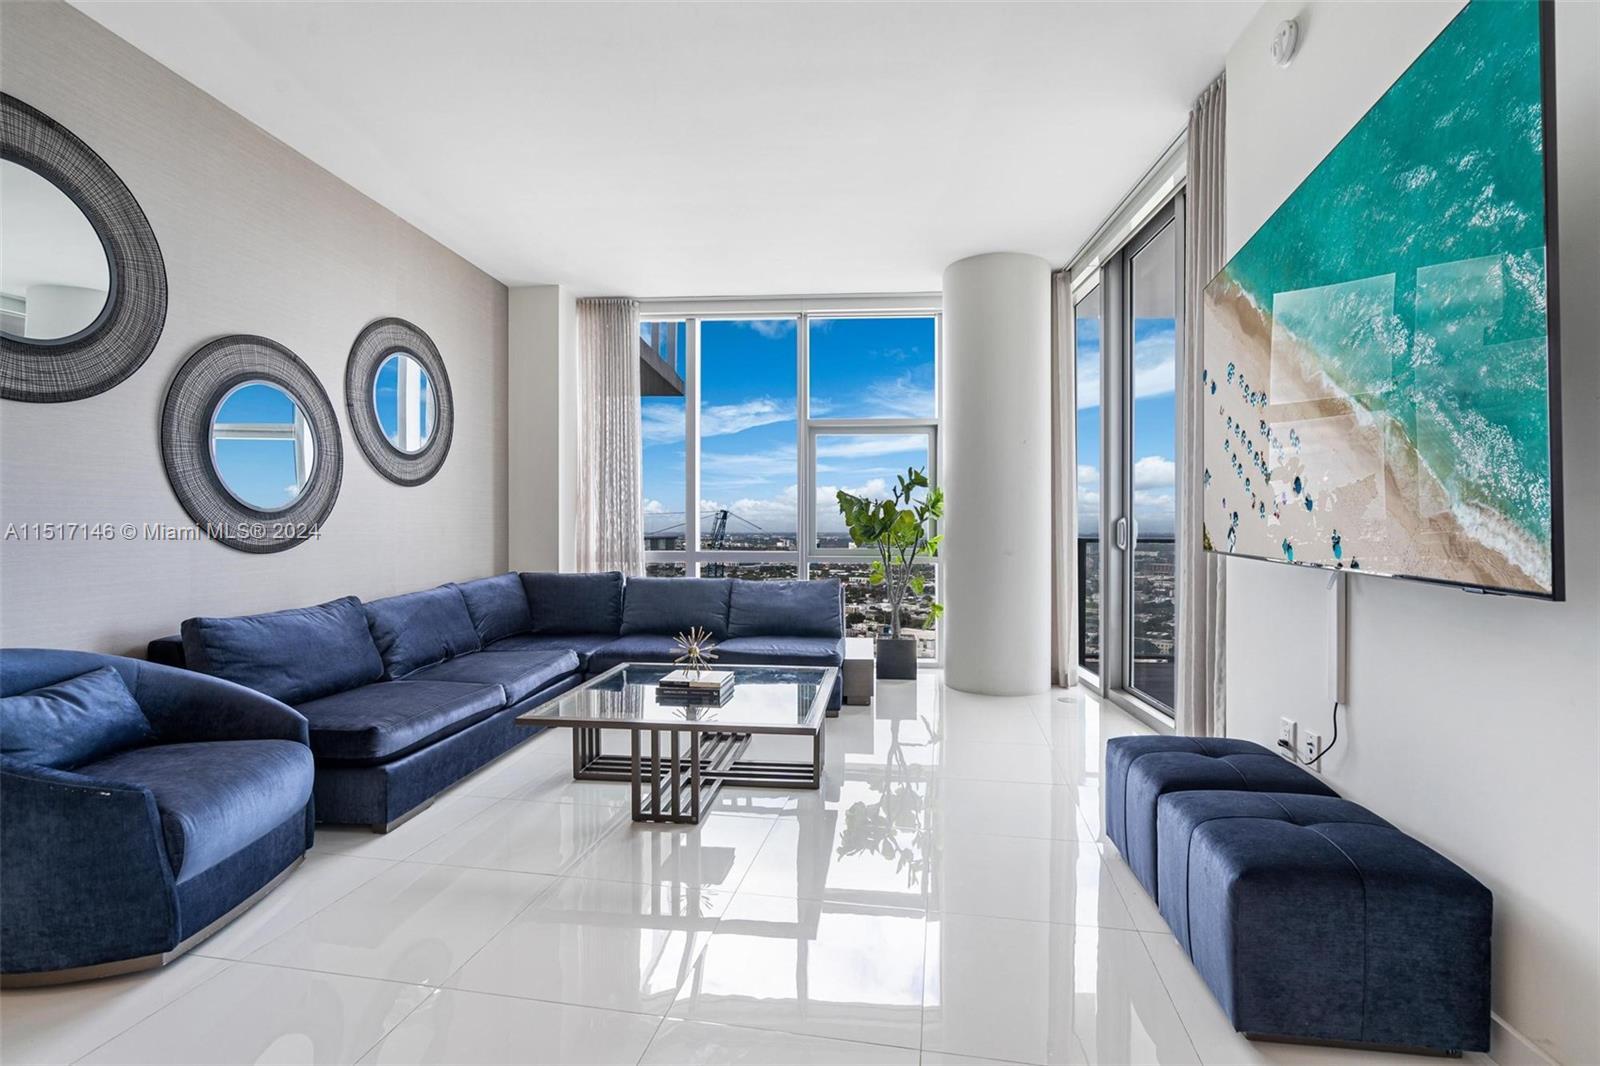 Welcome to Unit #3301 in the prestigious Paramount Miami Worldcenter, located in the heart of downto